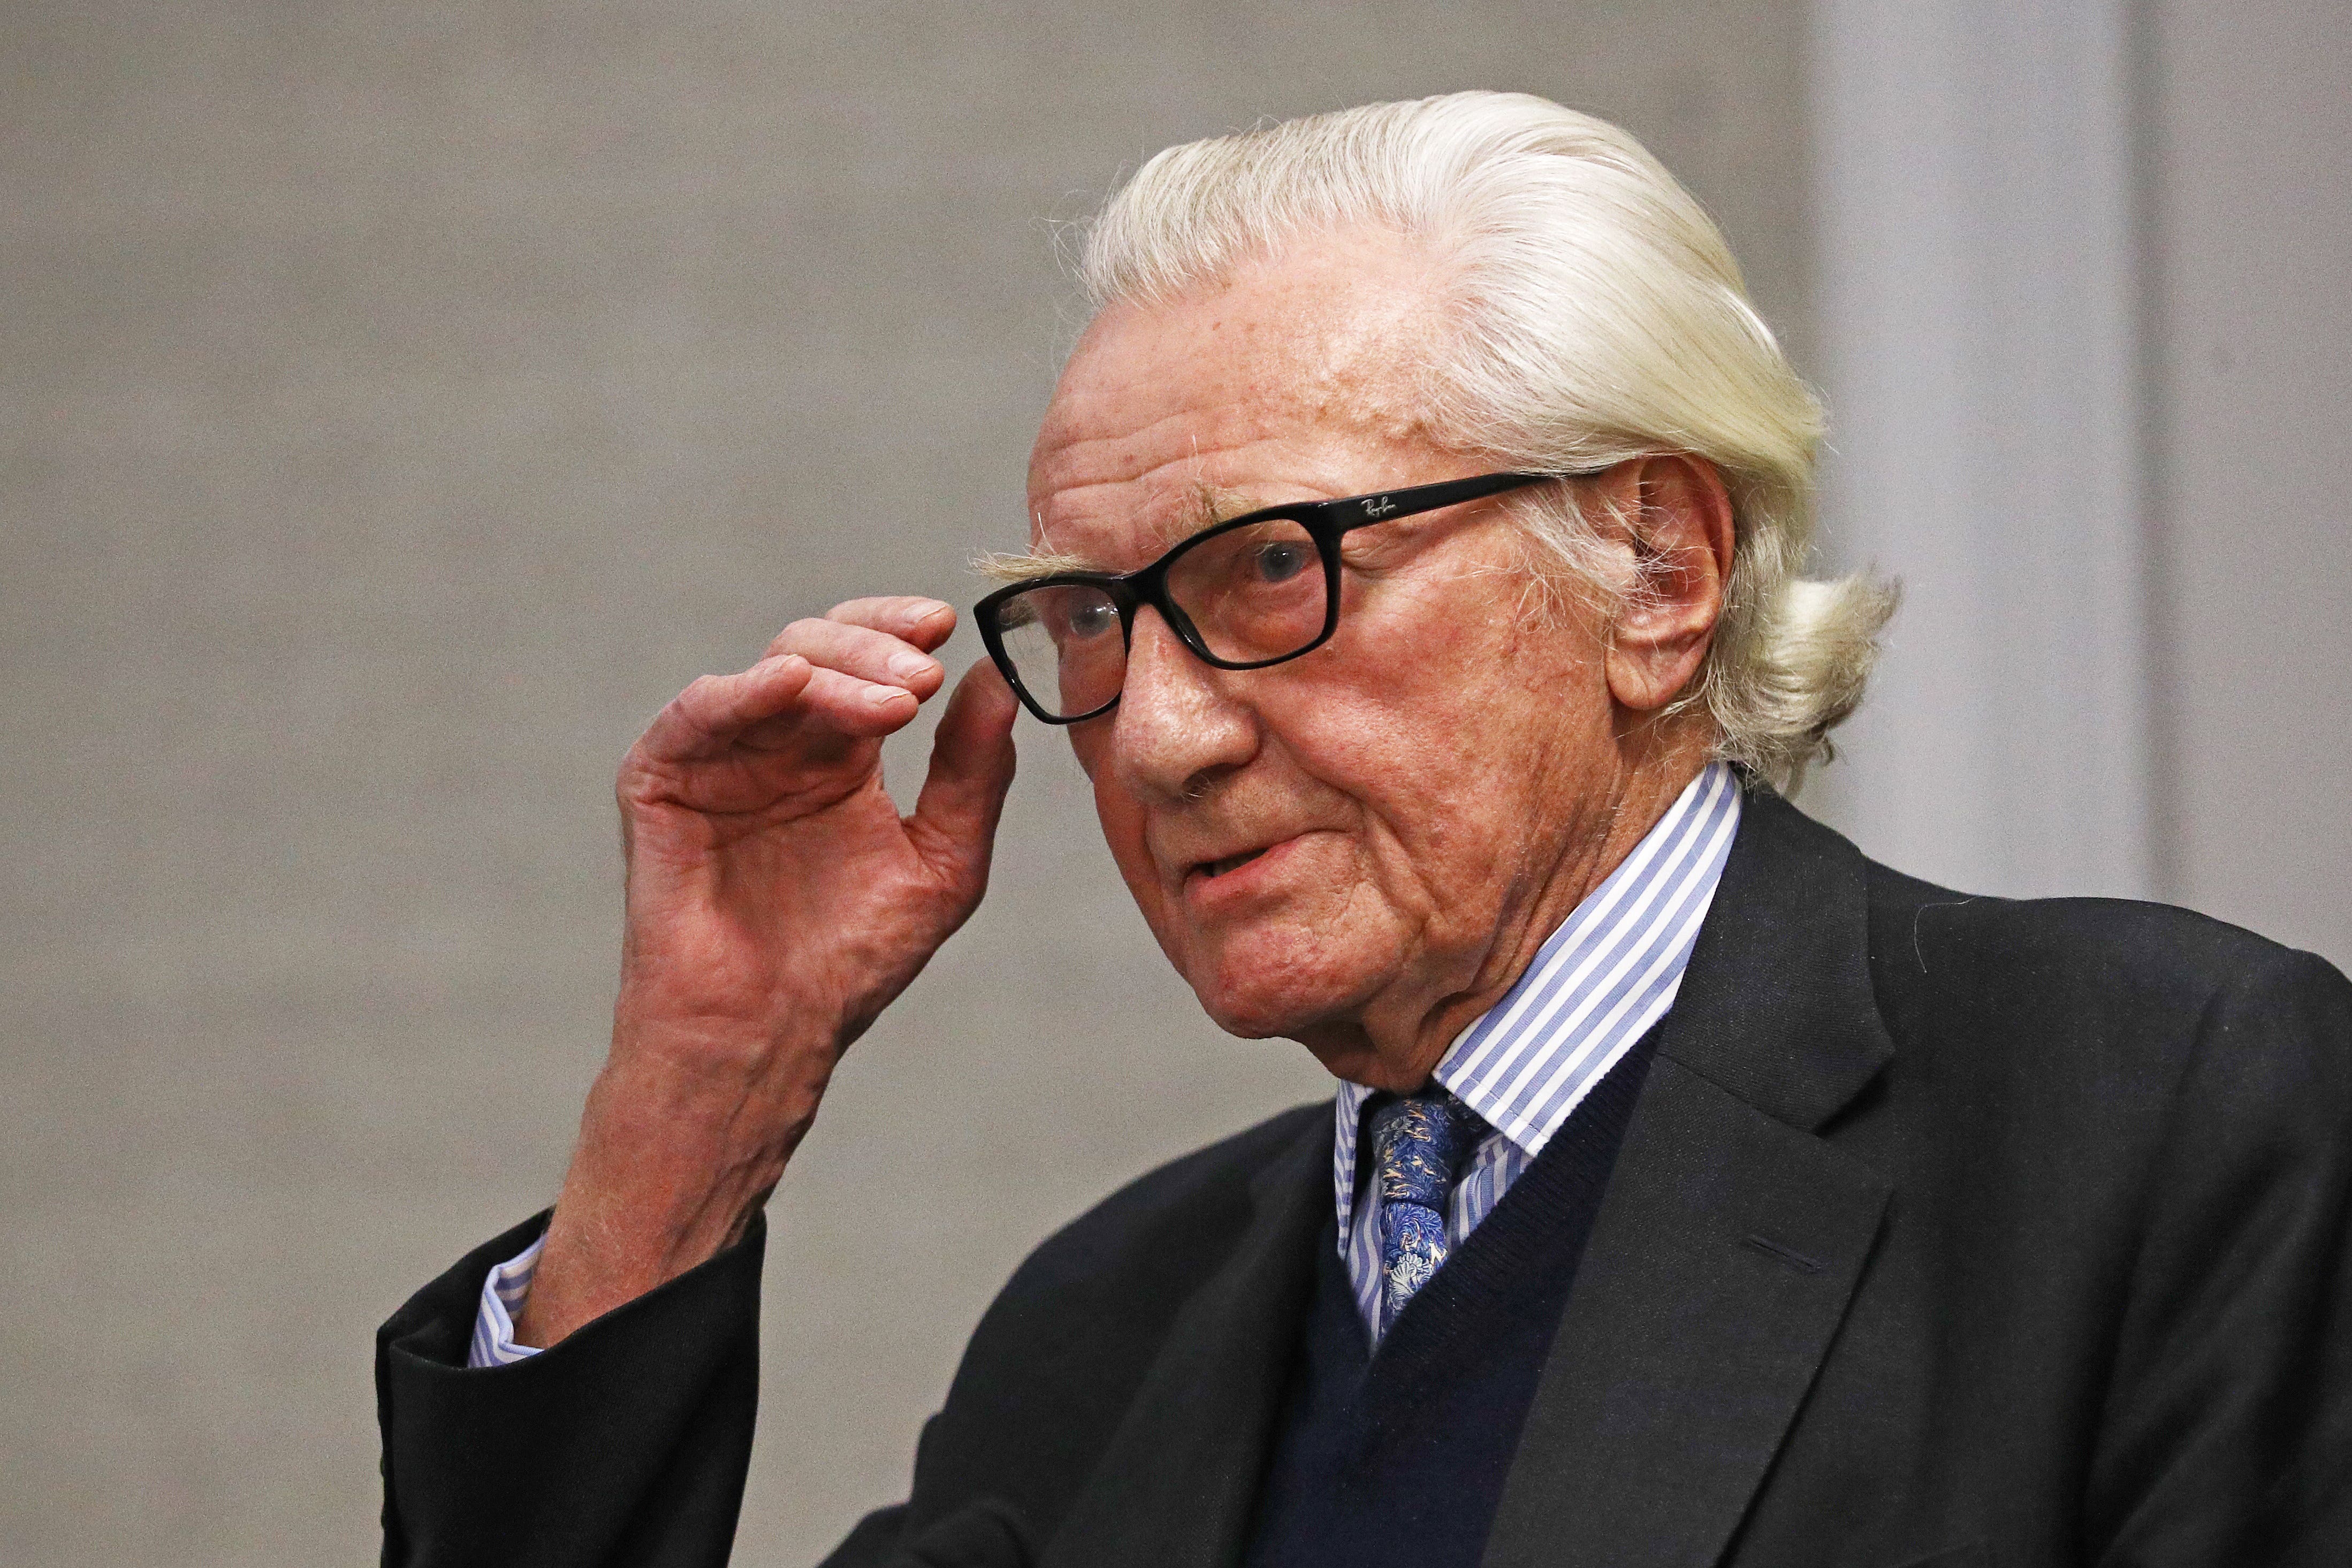 Michael Heseltine has warned about Brexit and the general election